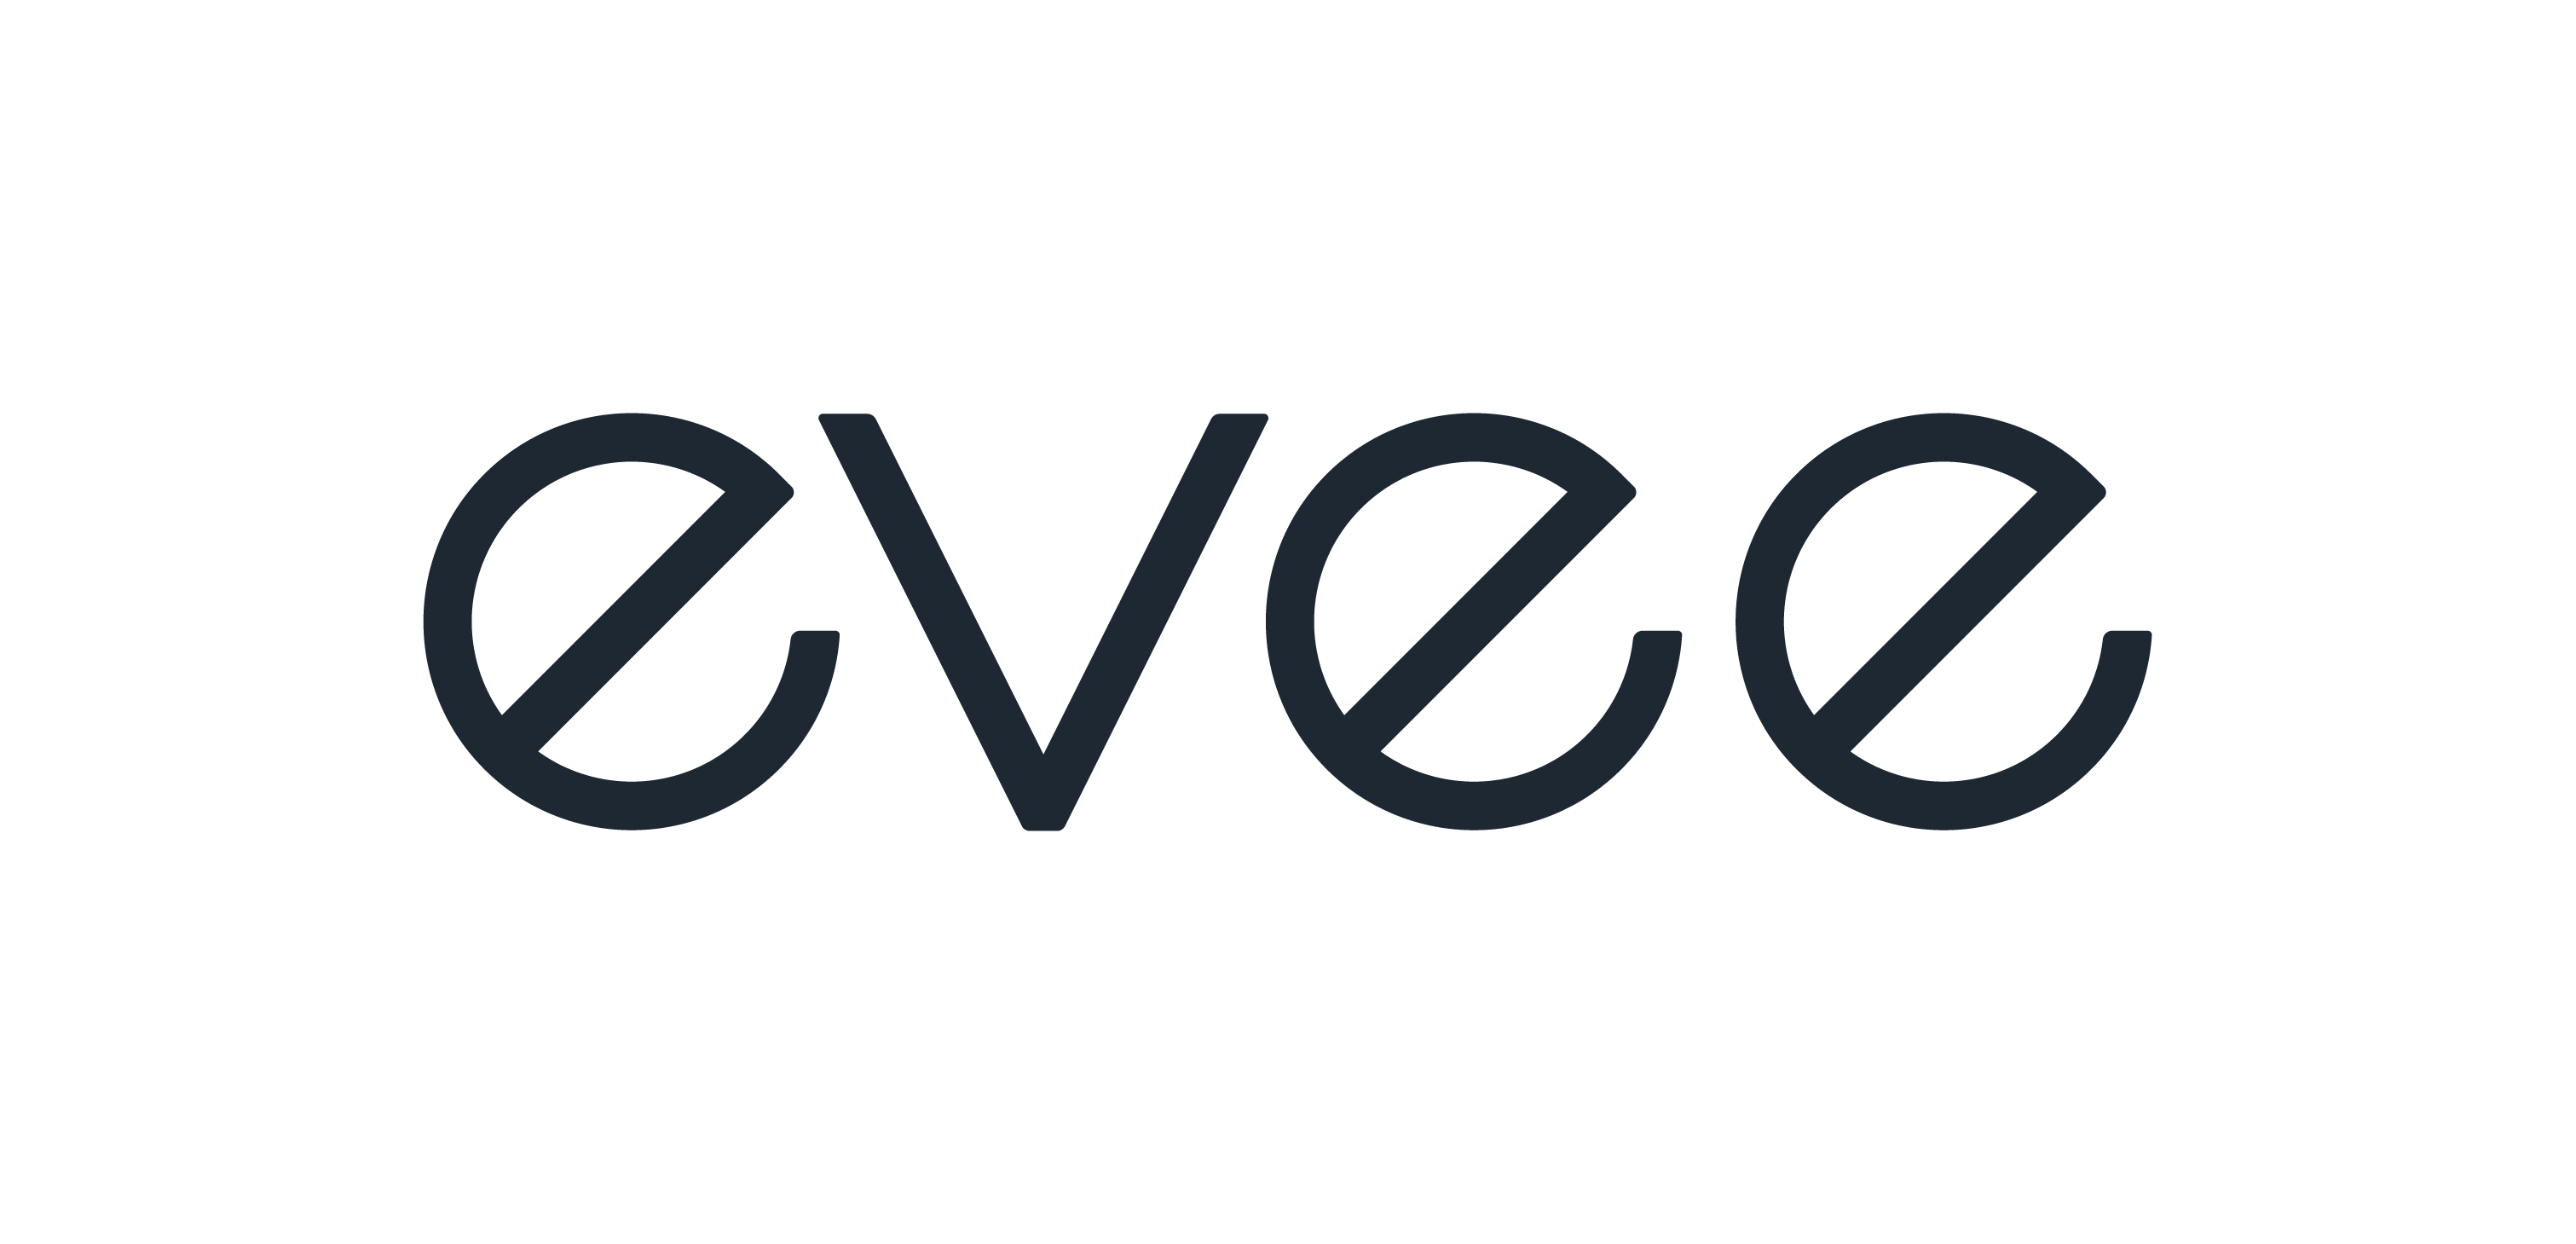 evee sitewide coupon code